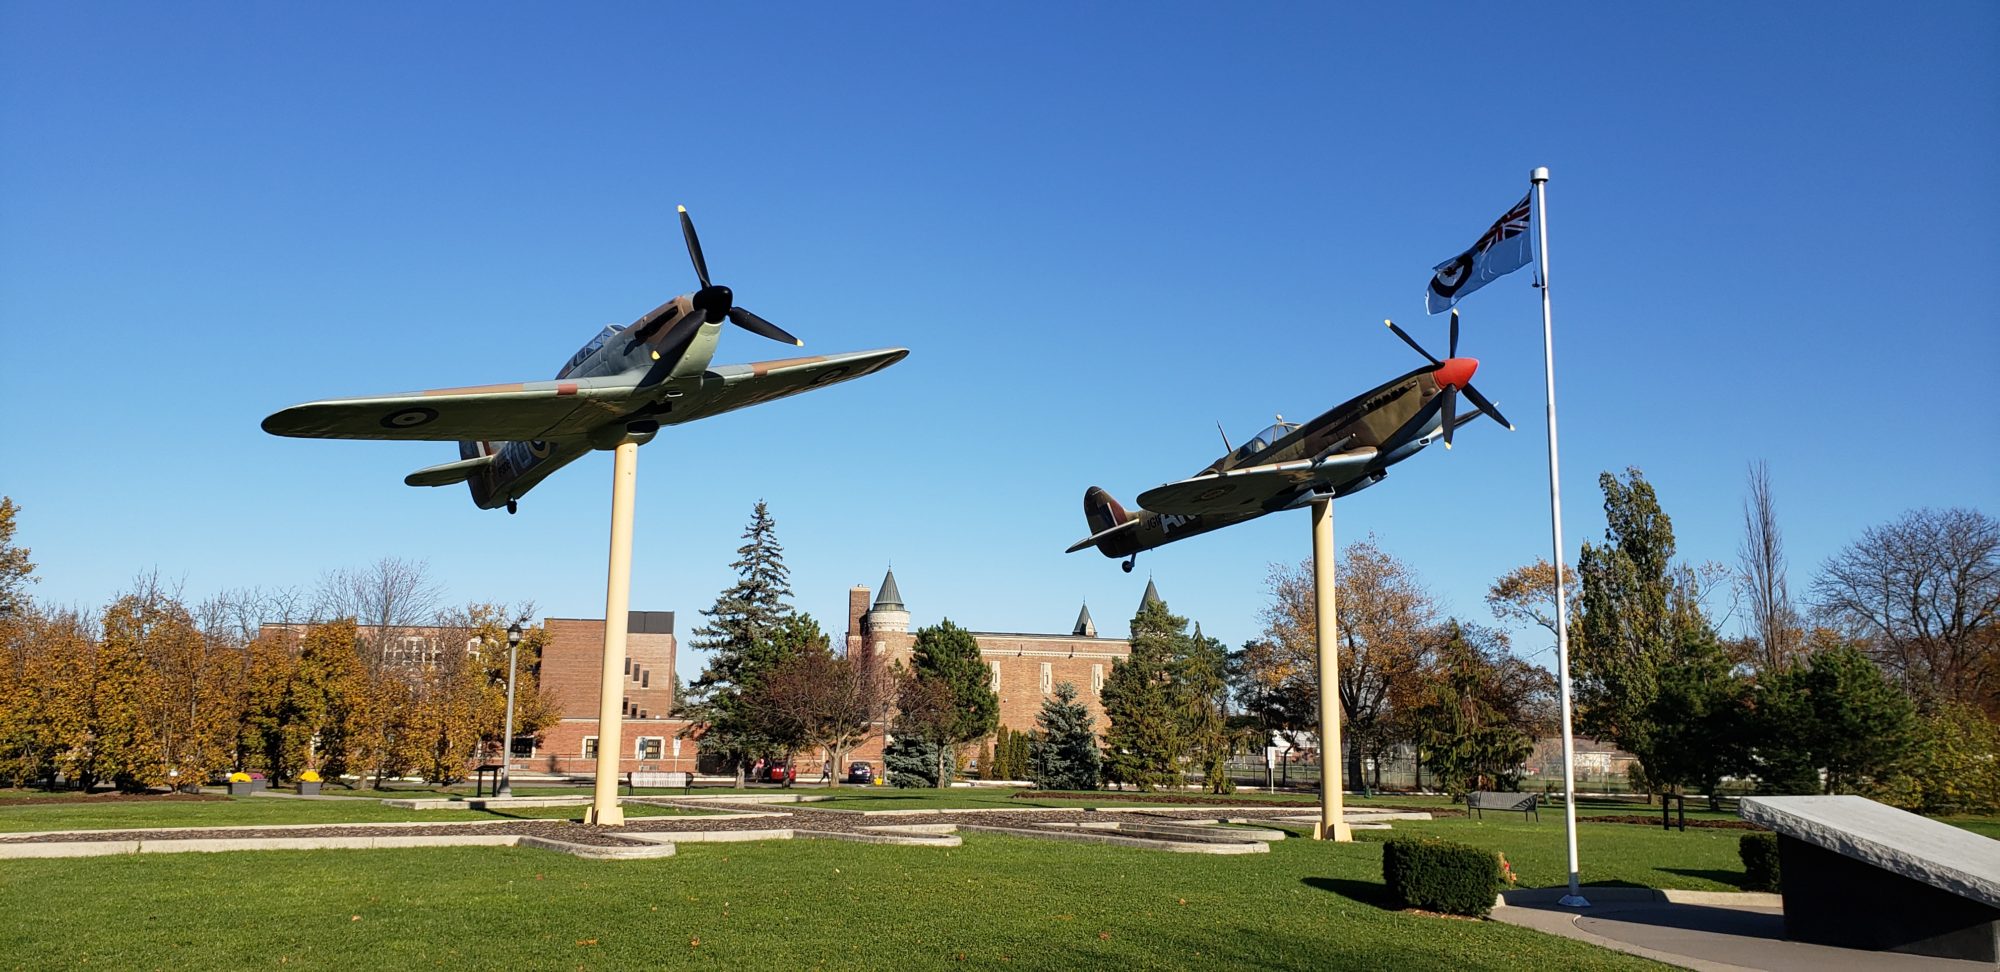 Fighter Jets from WWII guard the Canadian Air Force Memorial in Jackson Park